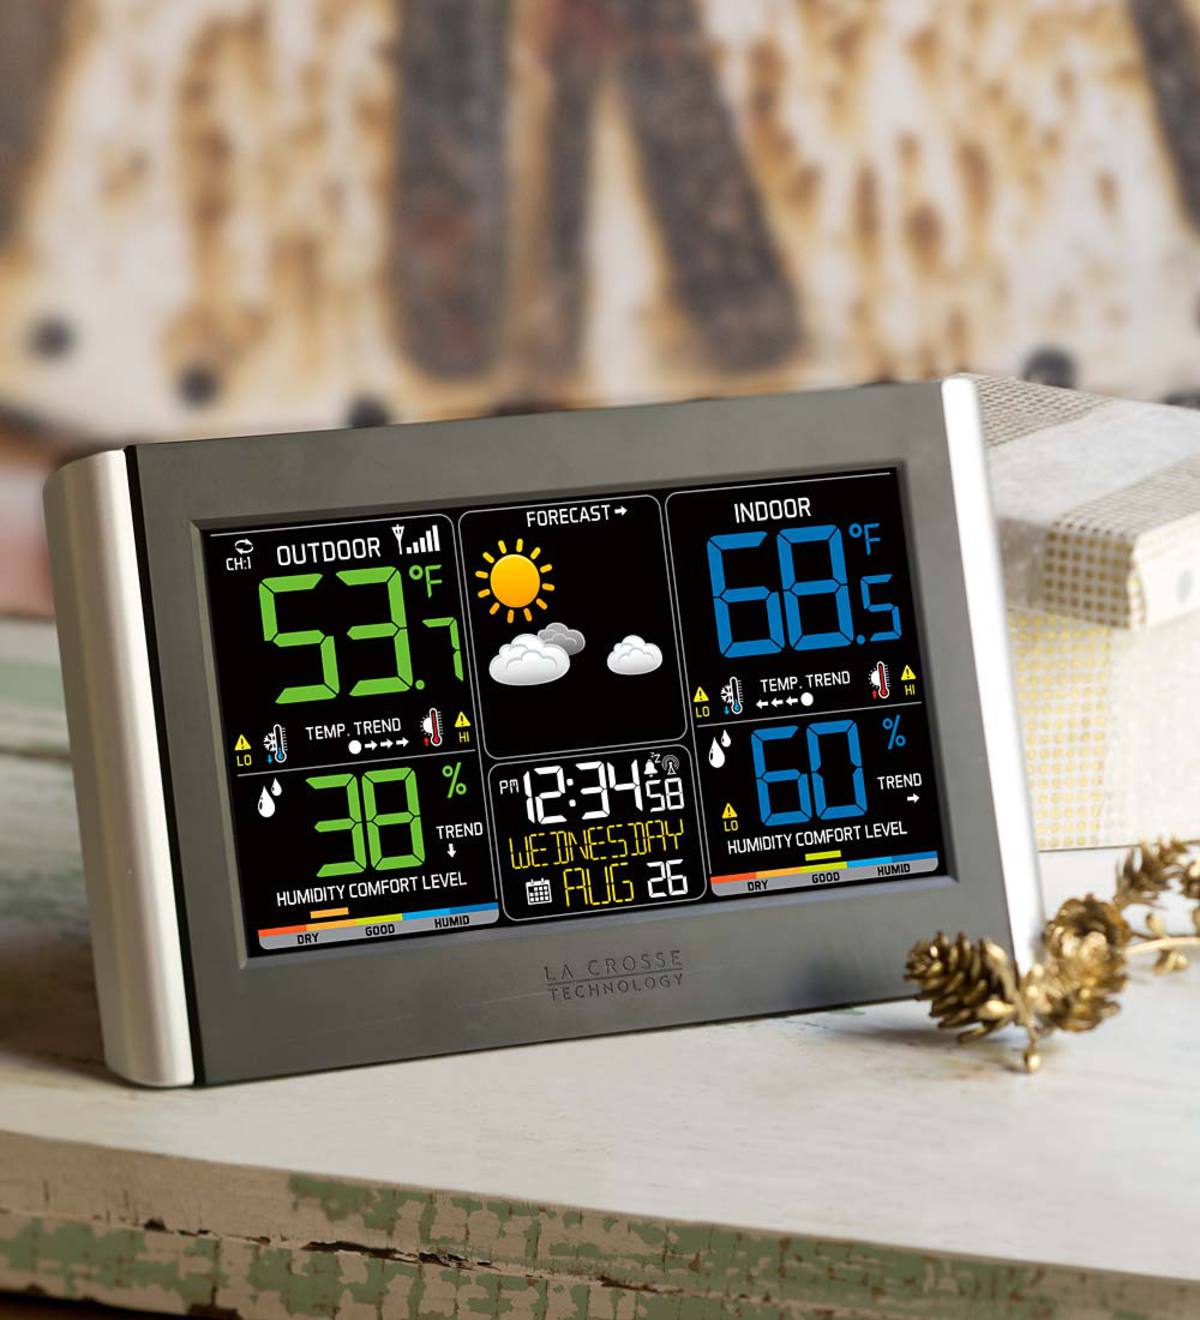 Horizontal Color Display Full-Function Weather Station with Wireless Remote Sensor